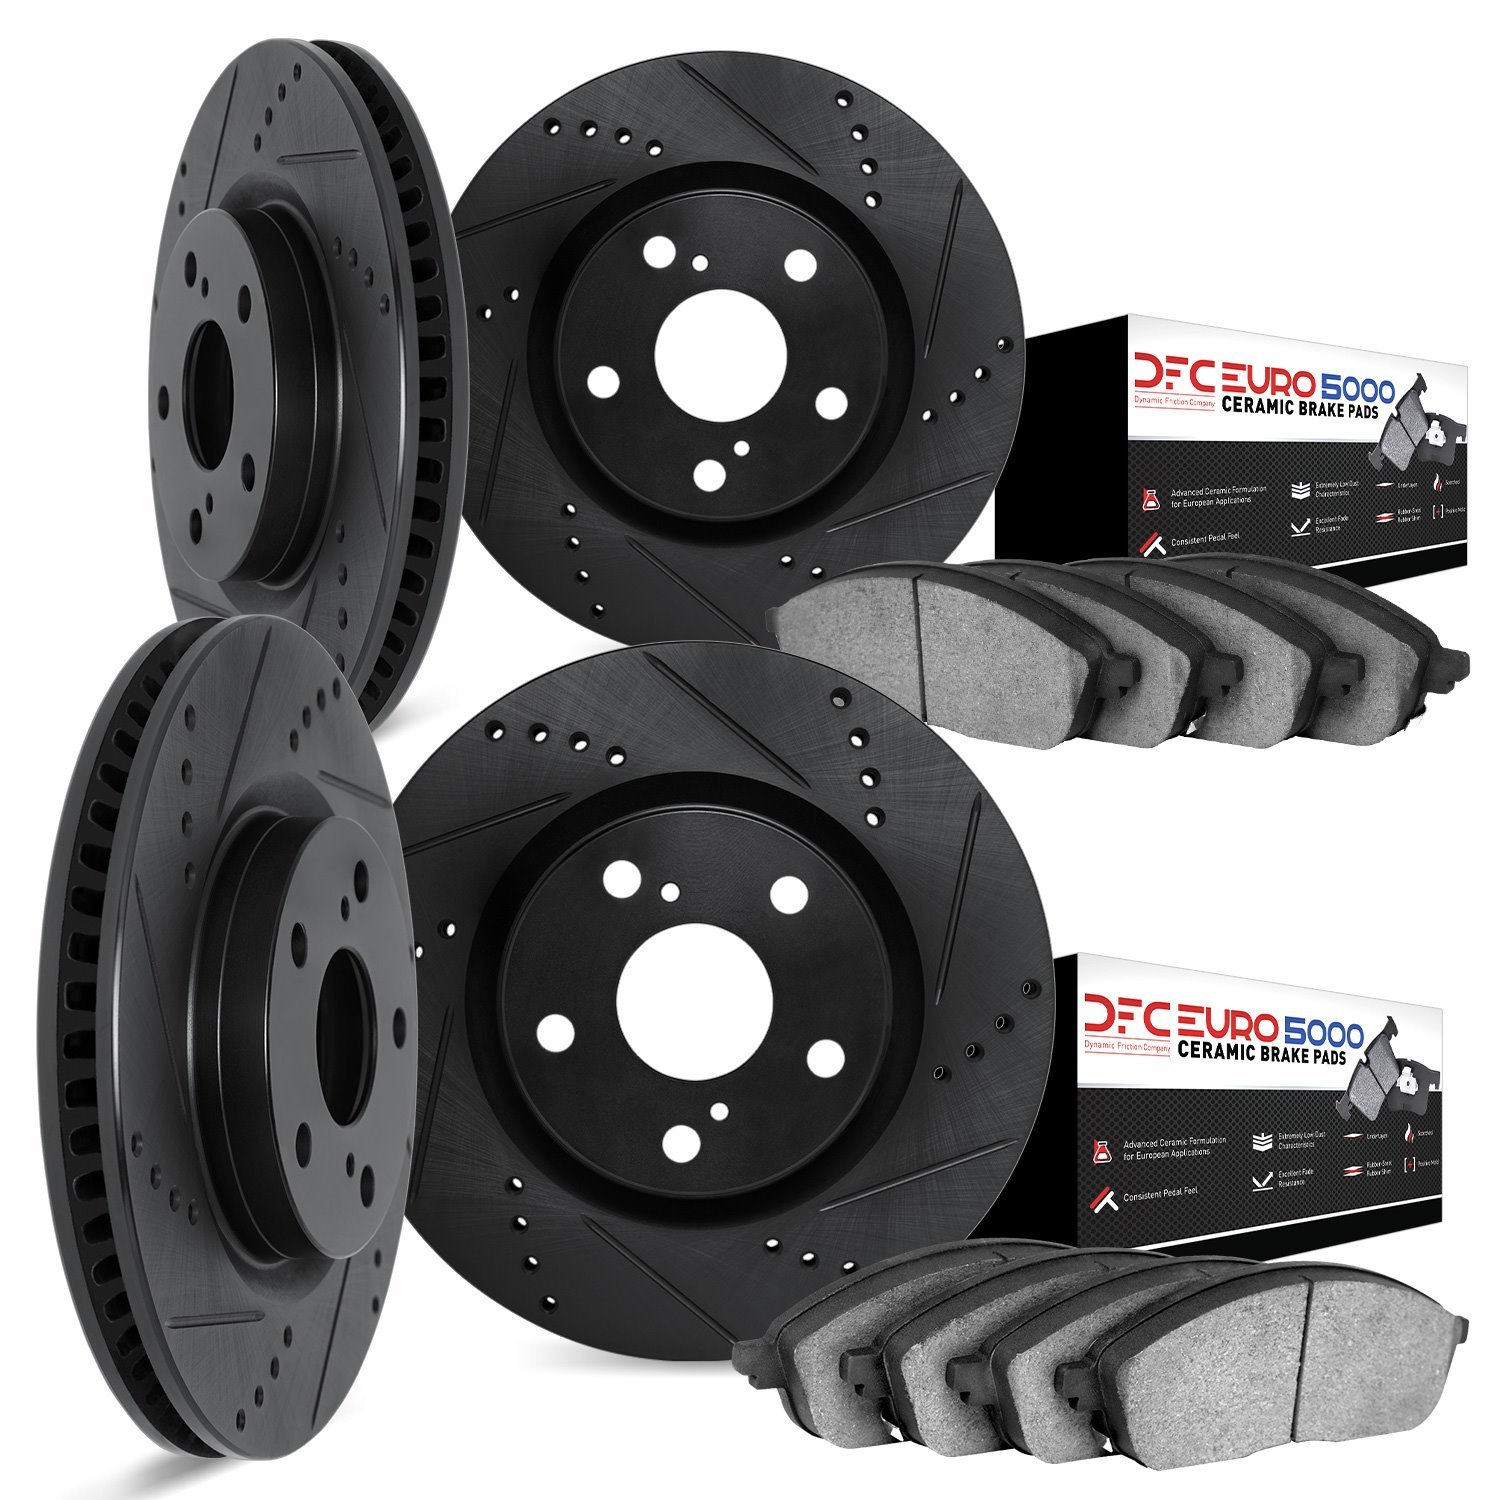 8604-31033 Drilled/Slotted Brake Rotors w/5000 Euro Ceramic Brake Pads Kit [Black], Fits Select BMW, Position: Front and Rear